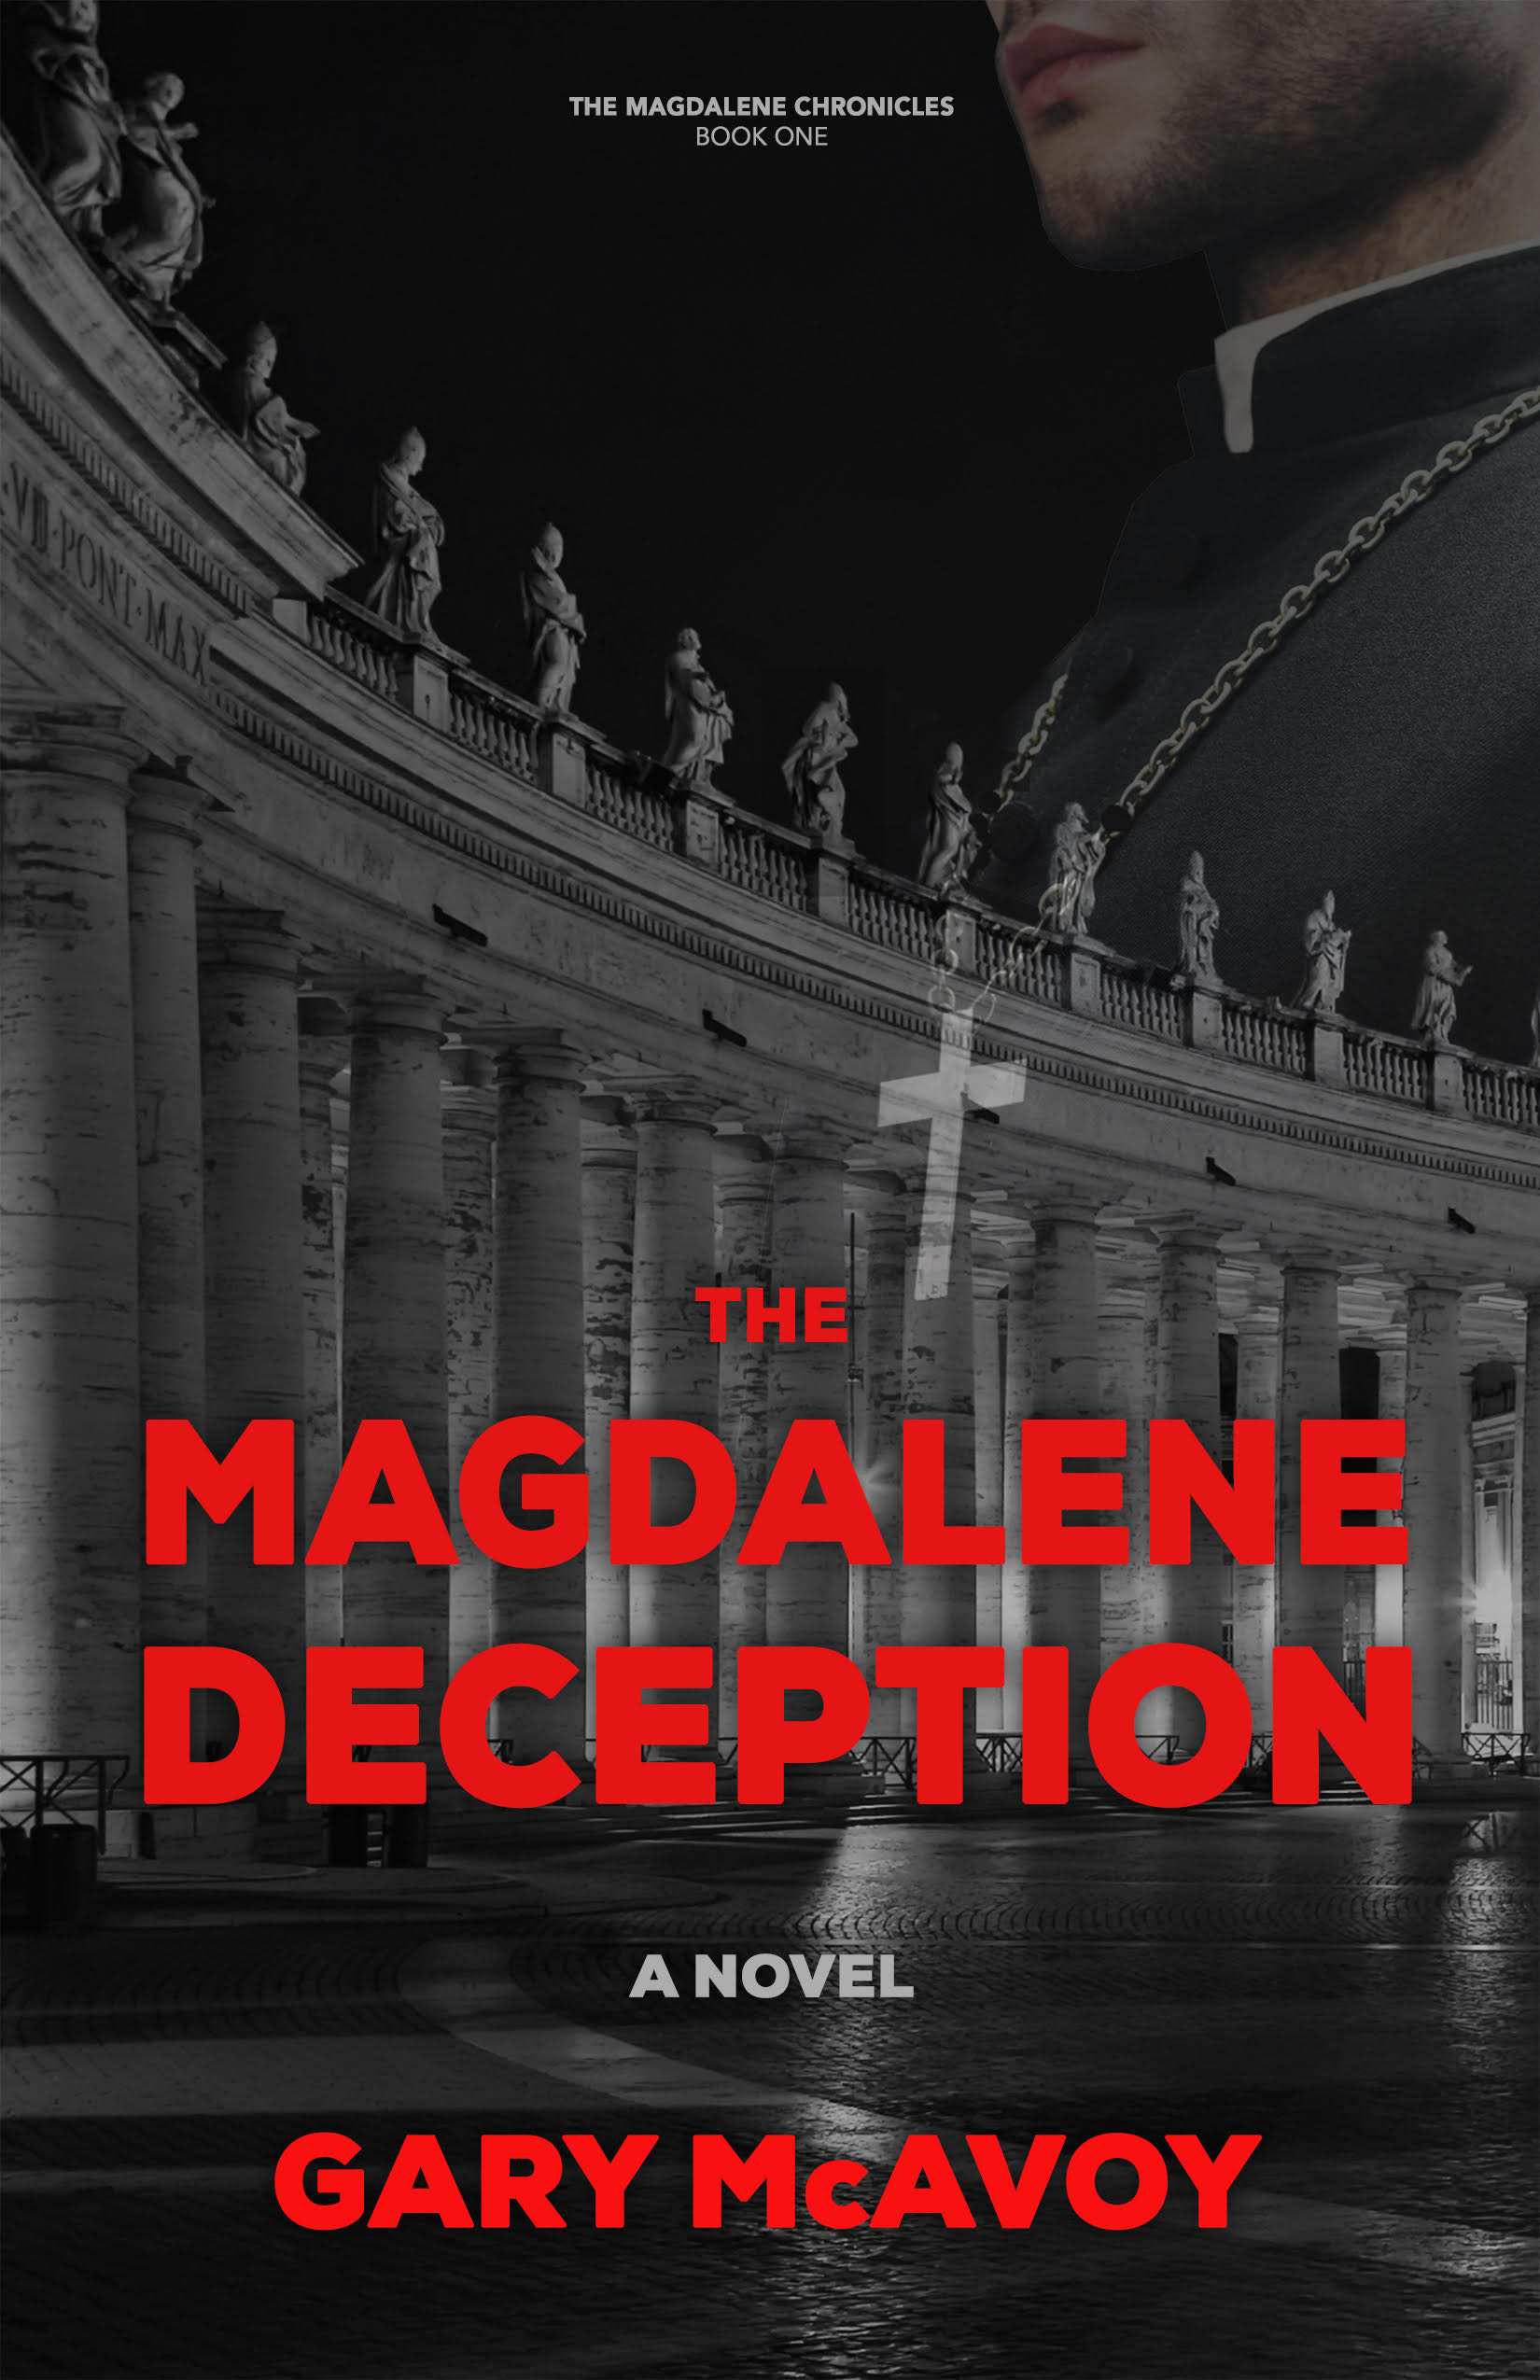 The Magdalene Deception by Gary McAvoy